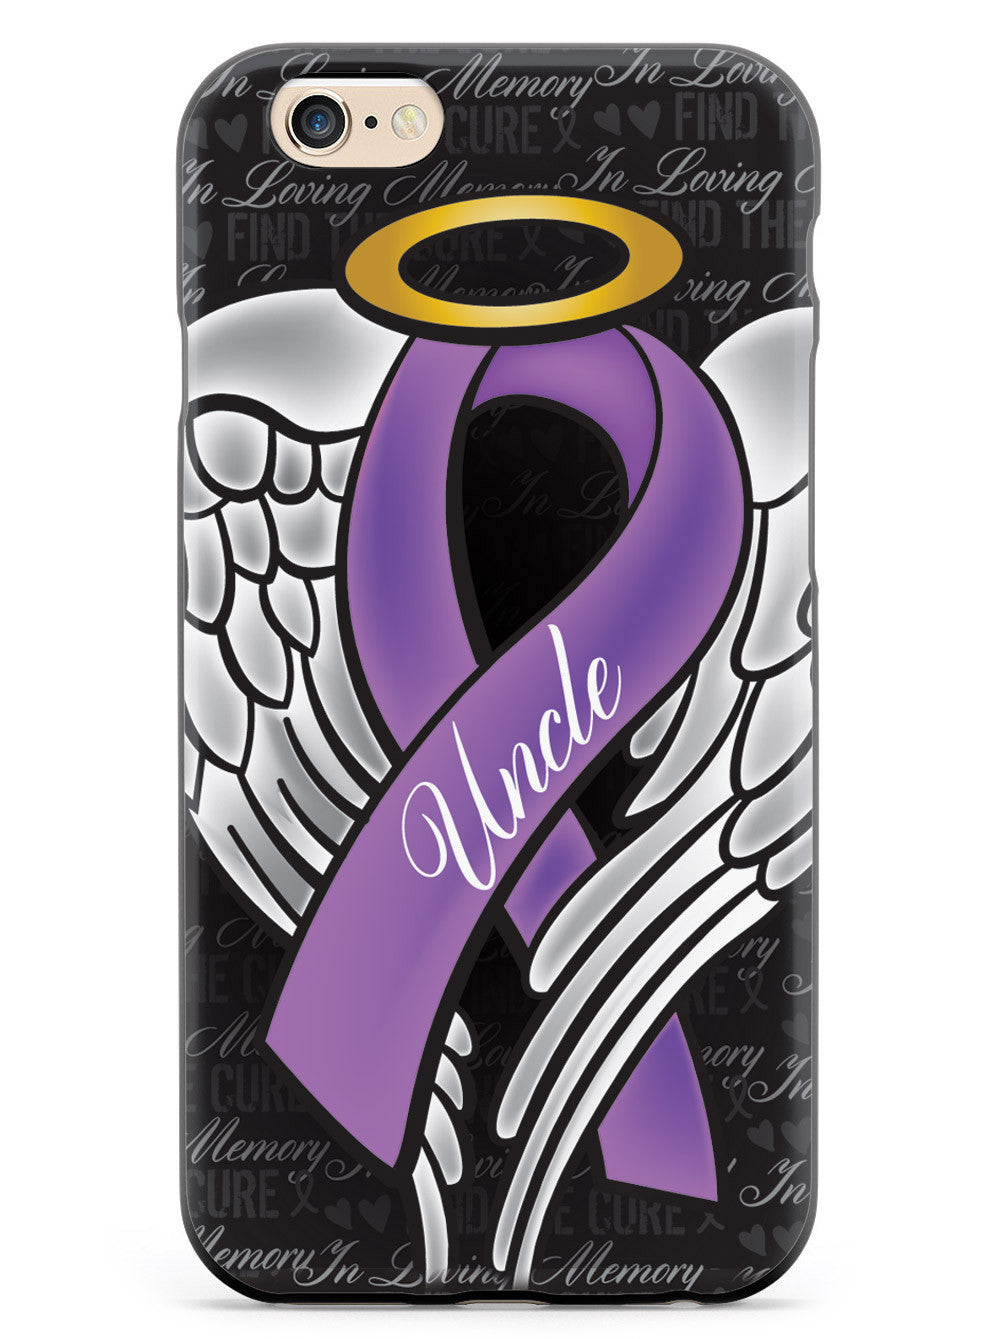 In Loving Memory of My Uncle - Purple Ribbon Case